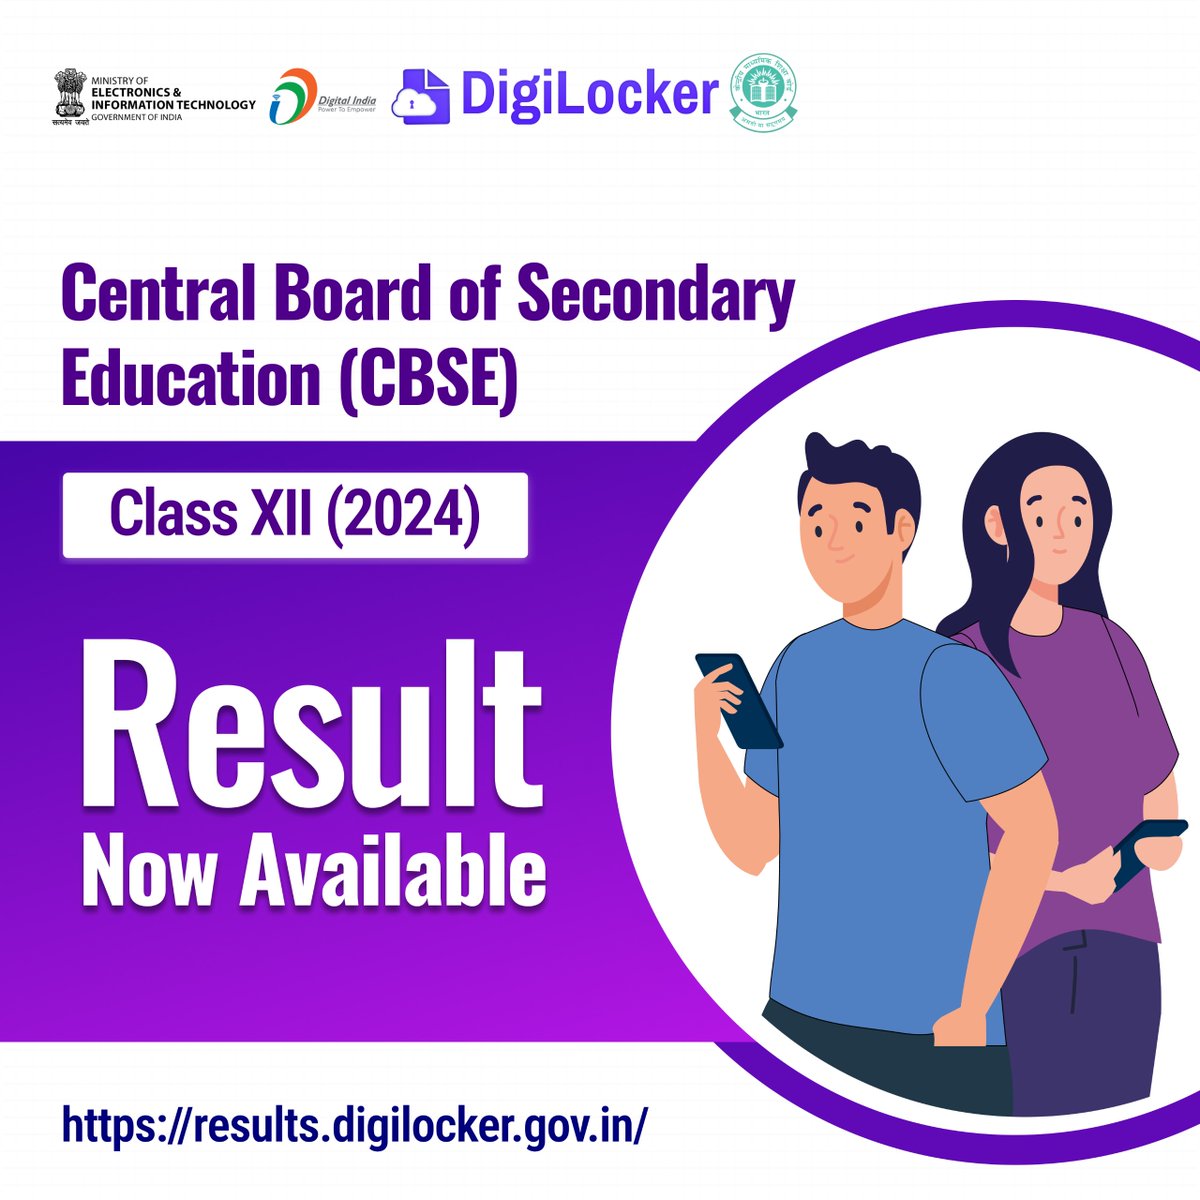 📢Good News! Congratulations to all #CBSE Class XII students. Your board results are now available on #DigiLocker Result page. Check your results now. All the best for your achievements! results.digilocker.gov.in #classXII #cbseresult2024